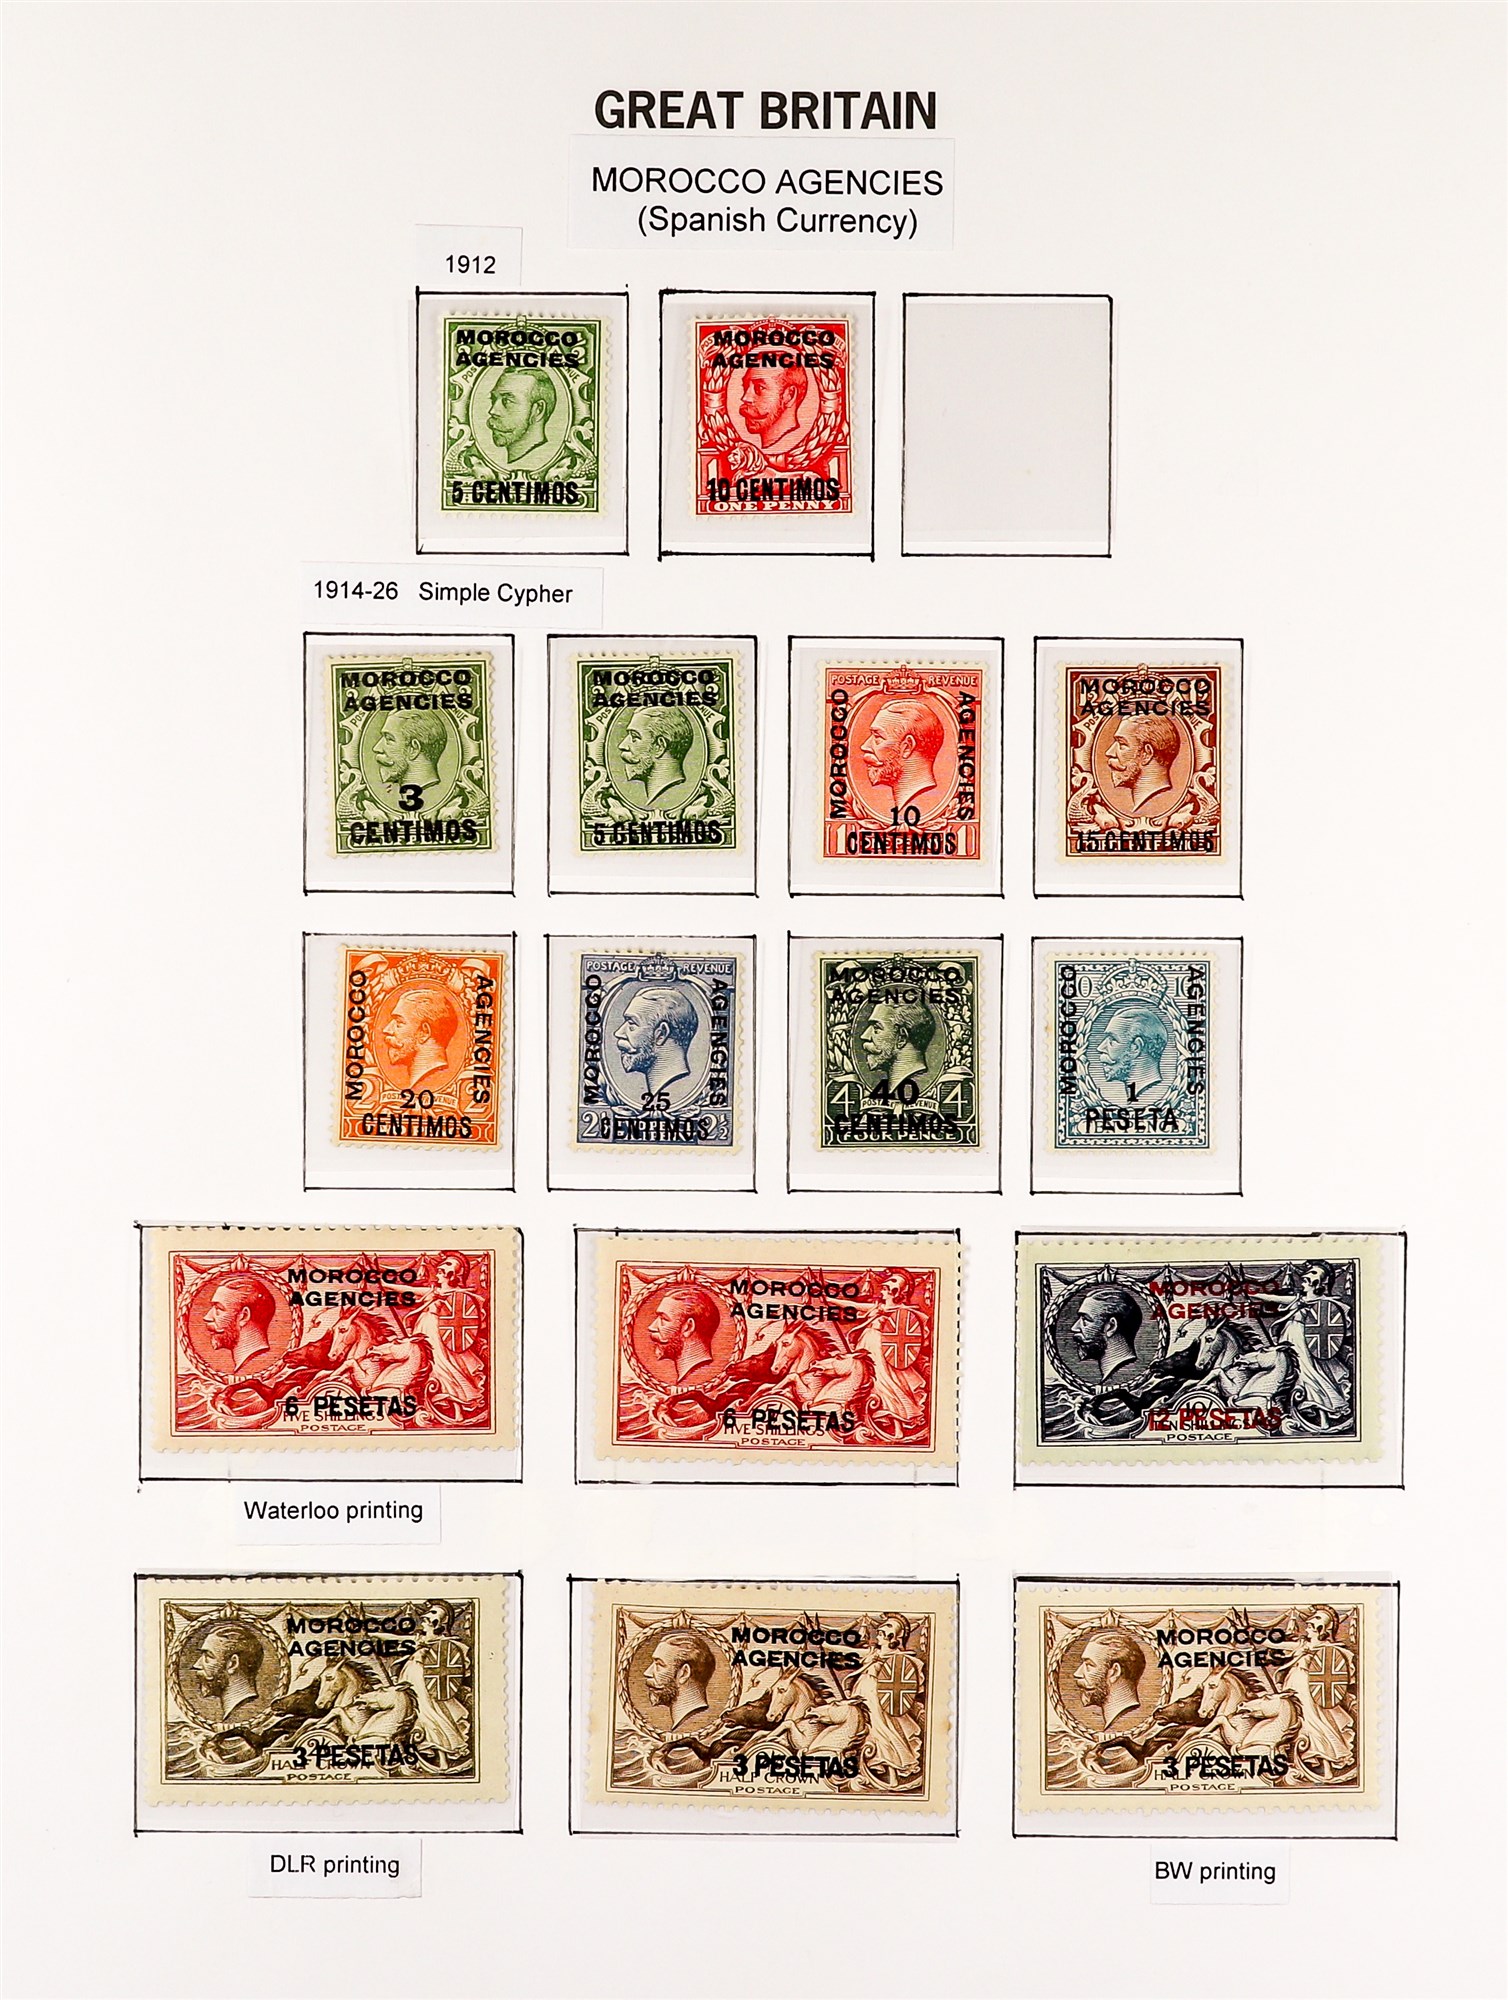 MOROCCO AGENCIES SPANISH CURRENCY 1912 - 1937 collection of mint stamps basically complete for the